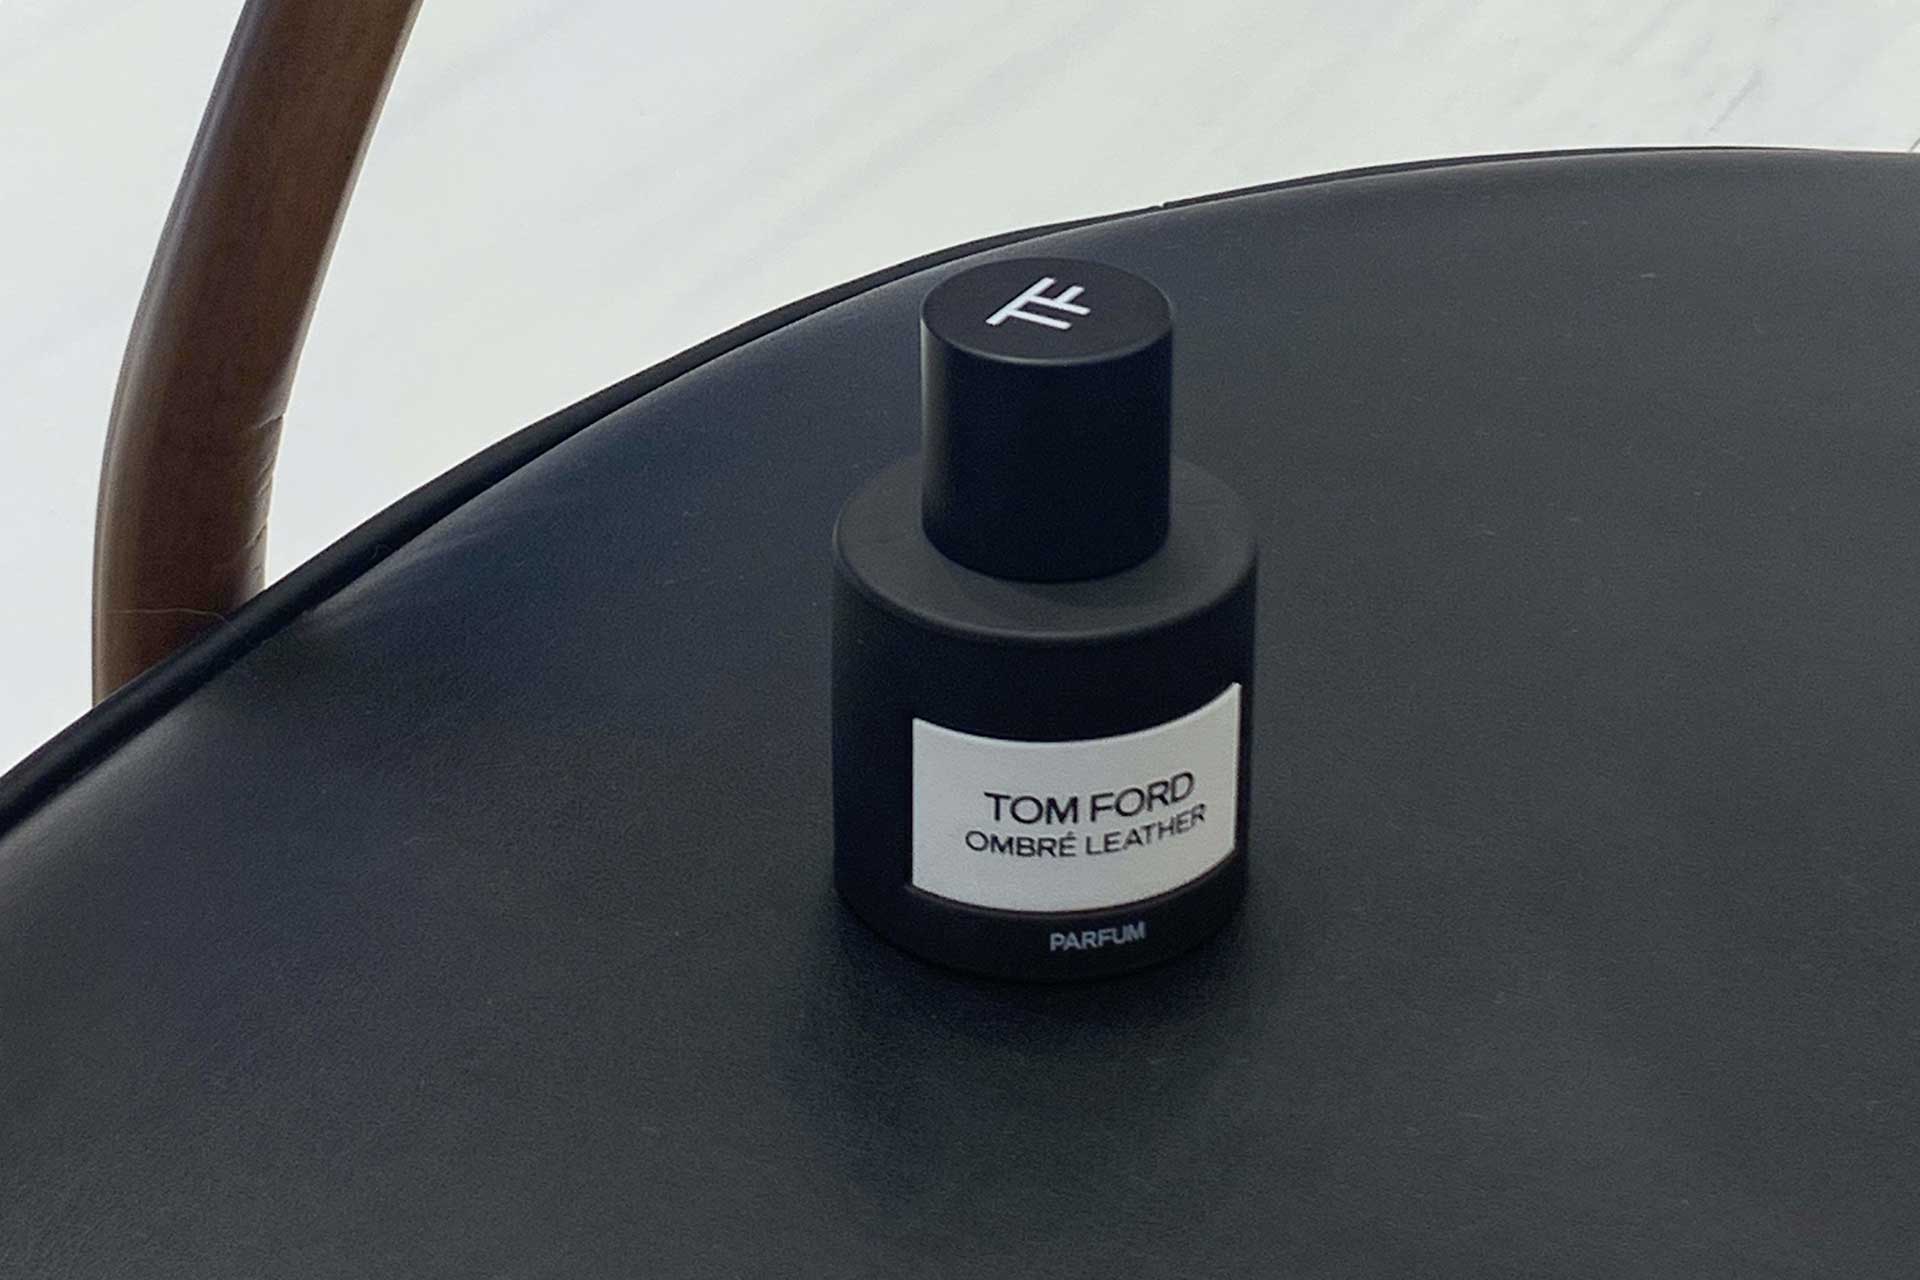 Ombre Leather TOM FORD - The Most Genuine Scent